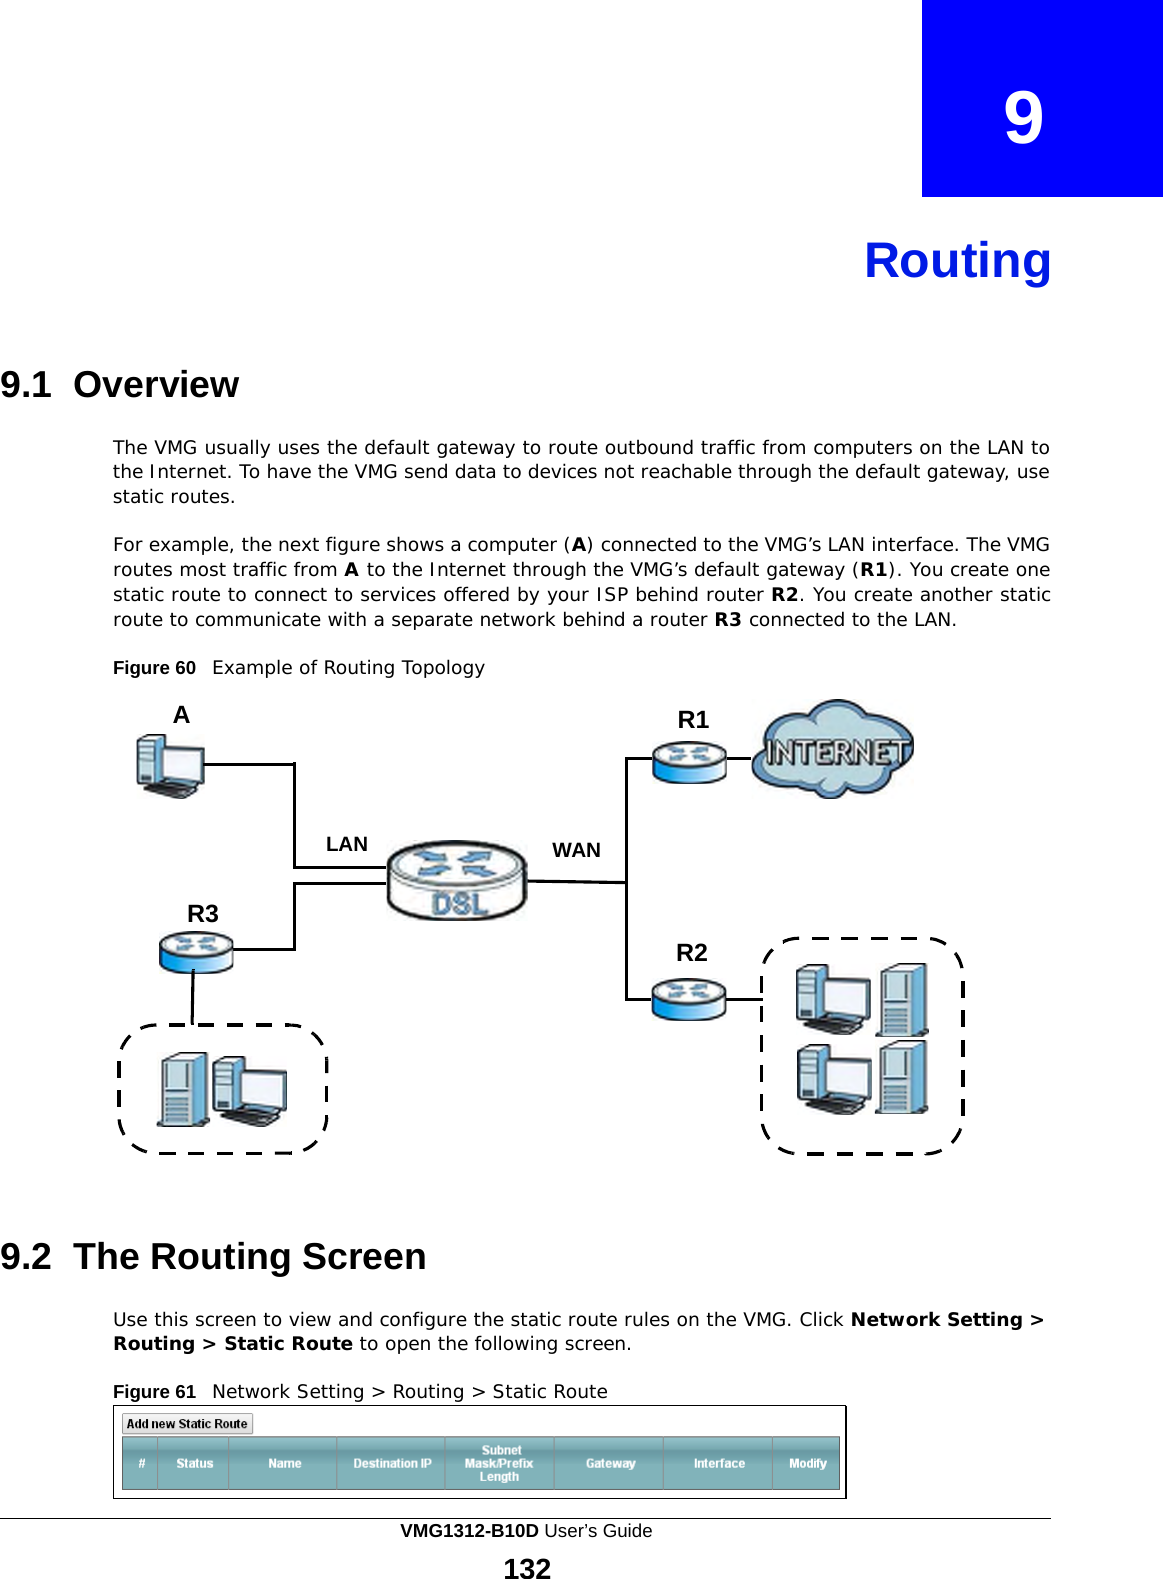                            9    Routing     9.1  Overview  The VMG usually uses the default gateway to route outbound traffic from computers on the LAN to the Internet. To have the VMG send data to devices not reachable through the default gateway, use static routes.  For example, the next figure shows a computer (A) connected to the VMG’s LAN interface. The VMG routes most traffic from A to the Internet through the VMG’s default gateway (R1). You create one static route to connect to services offered by your ISP behind router R2. You create another static route to communicate with a separate network behind a router R3 connected to the LAN.  Figure 60   Example of Routing Topology  A  R1      LAN WAN   R3 R2              9.2 The Routing Screen  Use this screen to view and configure the static route rules on the VMG. Click Network Setting &gt; Routing &gt; Static Route to open the following screen.  Figure 61   Network Setting &gt; Routing &gt; Static Route VMG1312-B10D User’s Guide 132  